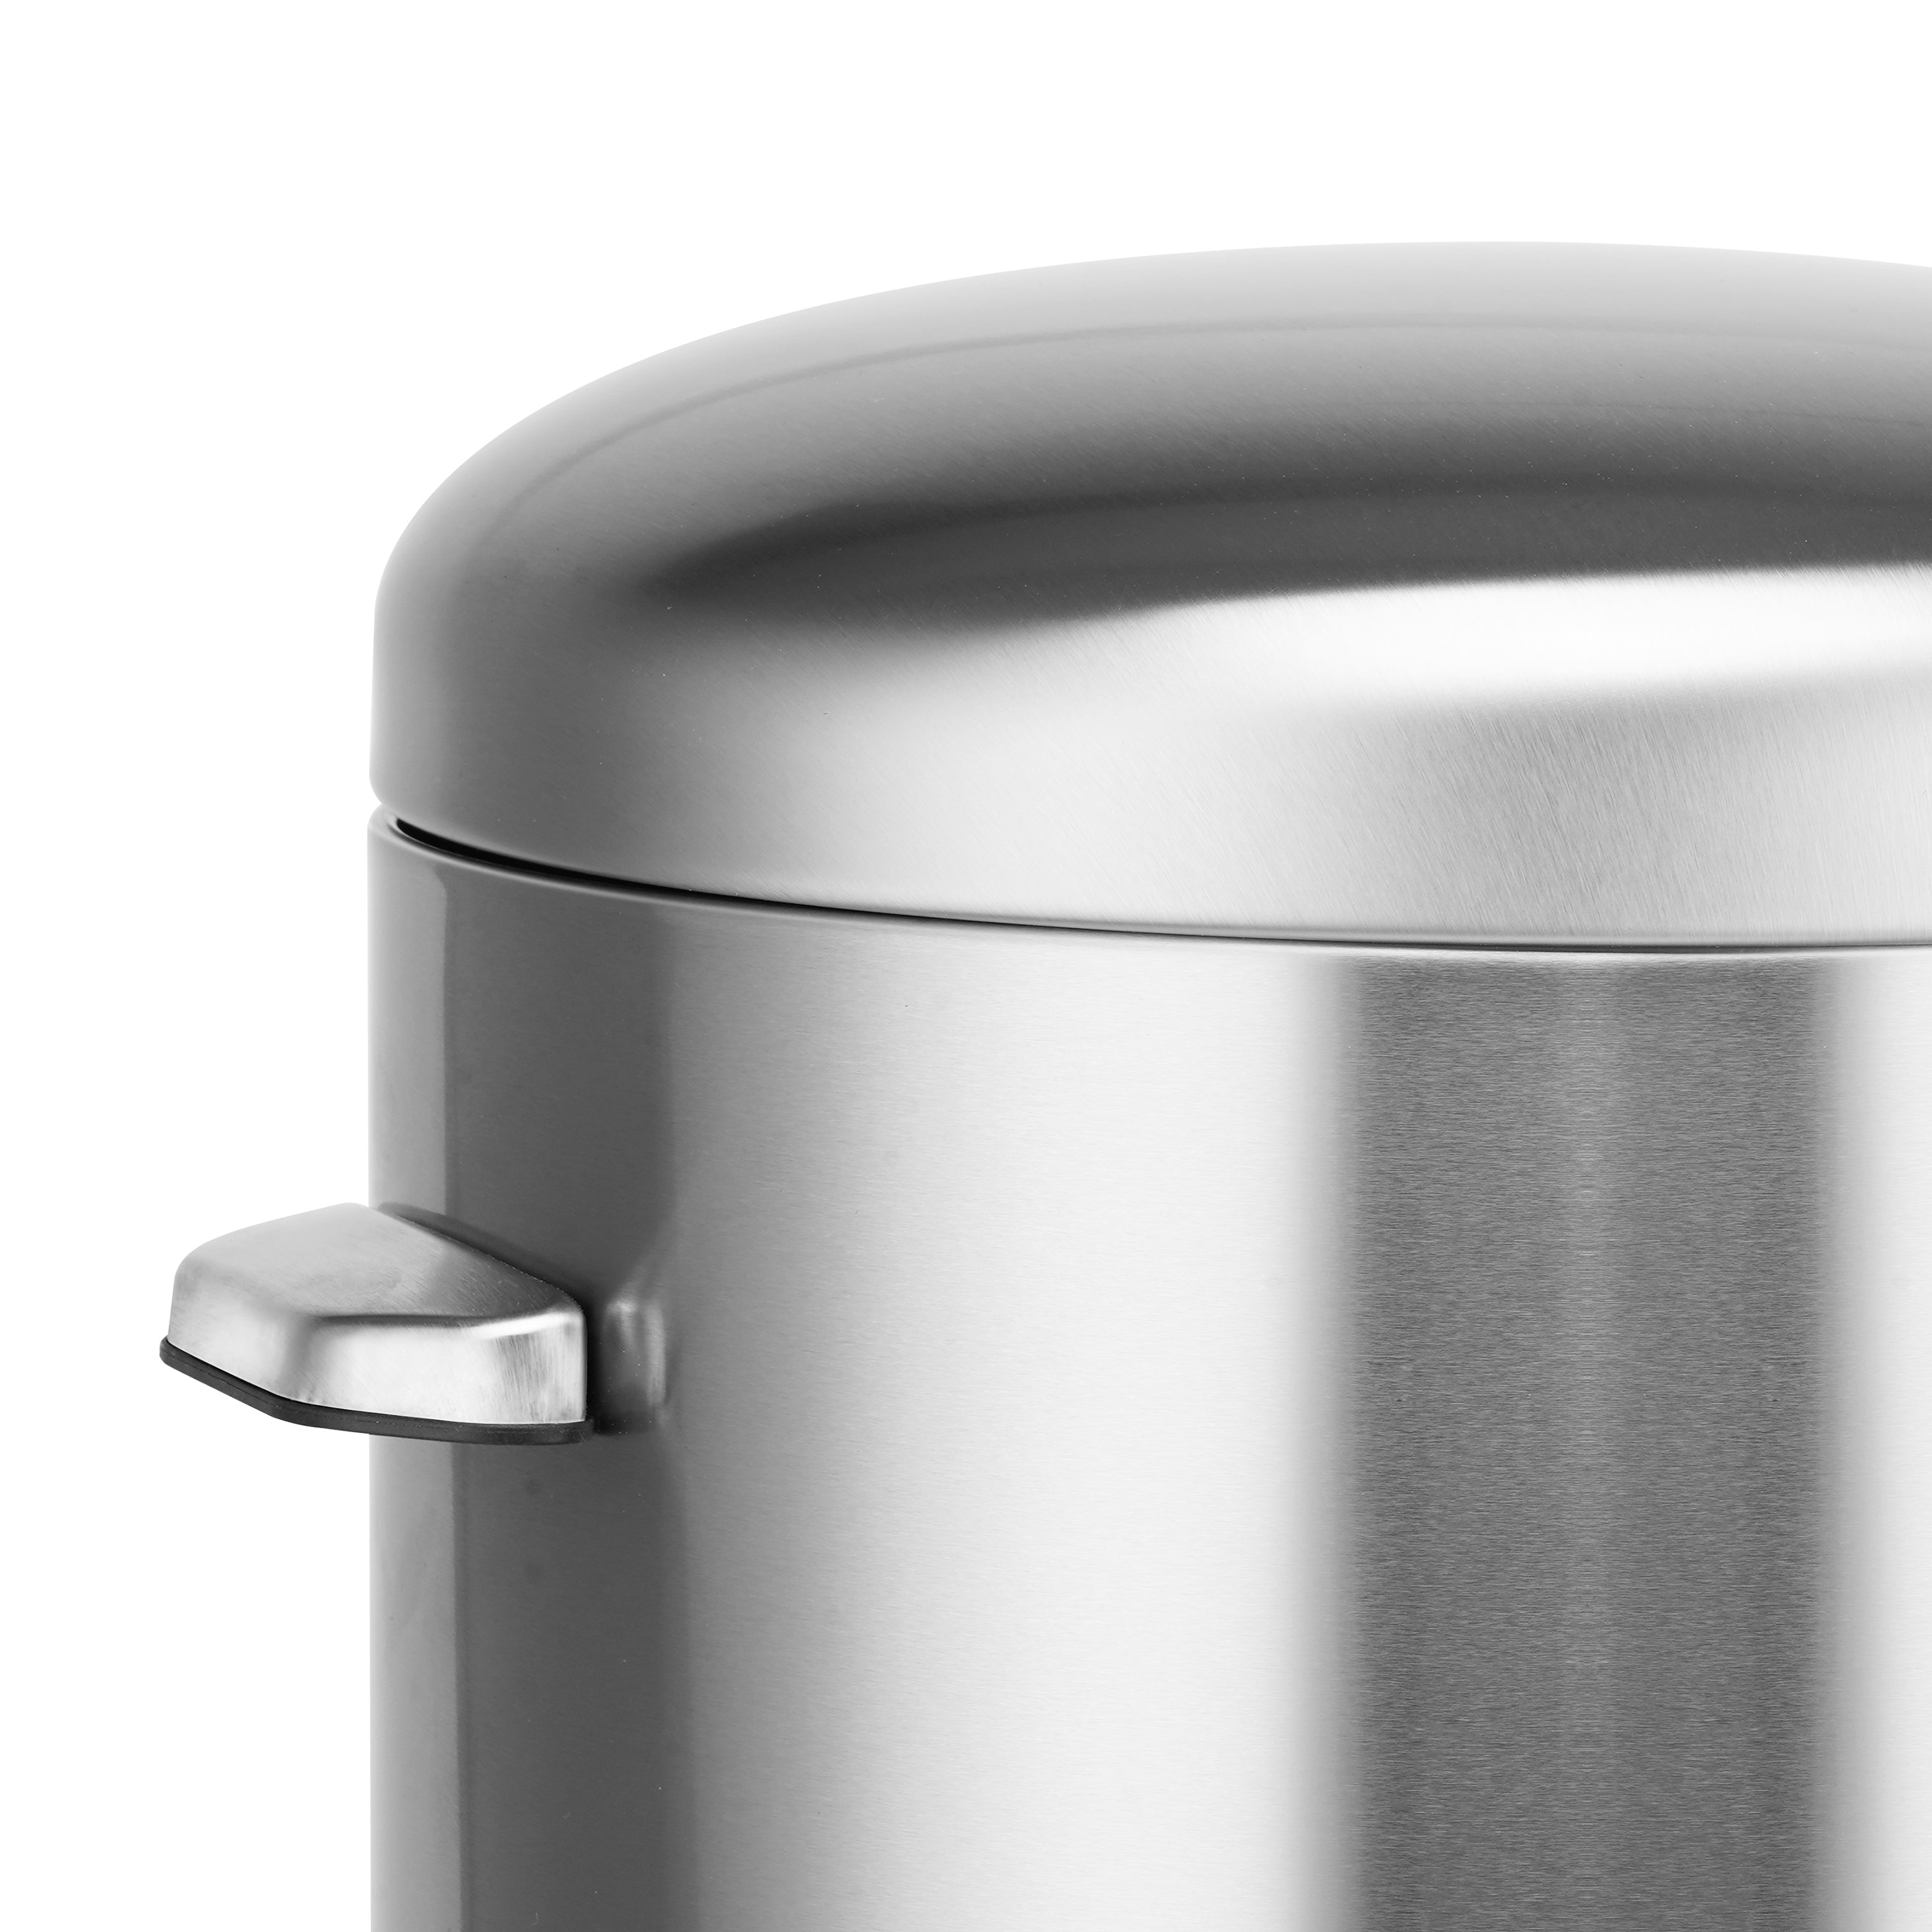 8 Gal./30 Liter Stainless Steel Round Shape Step-on Trash Can for Kitchen